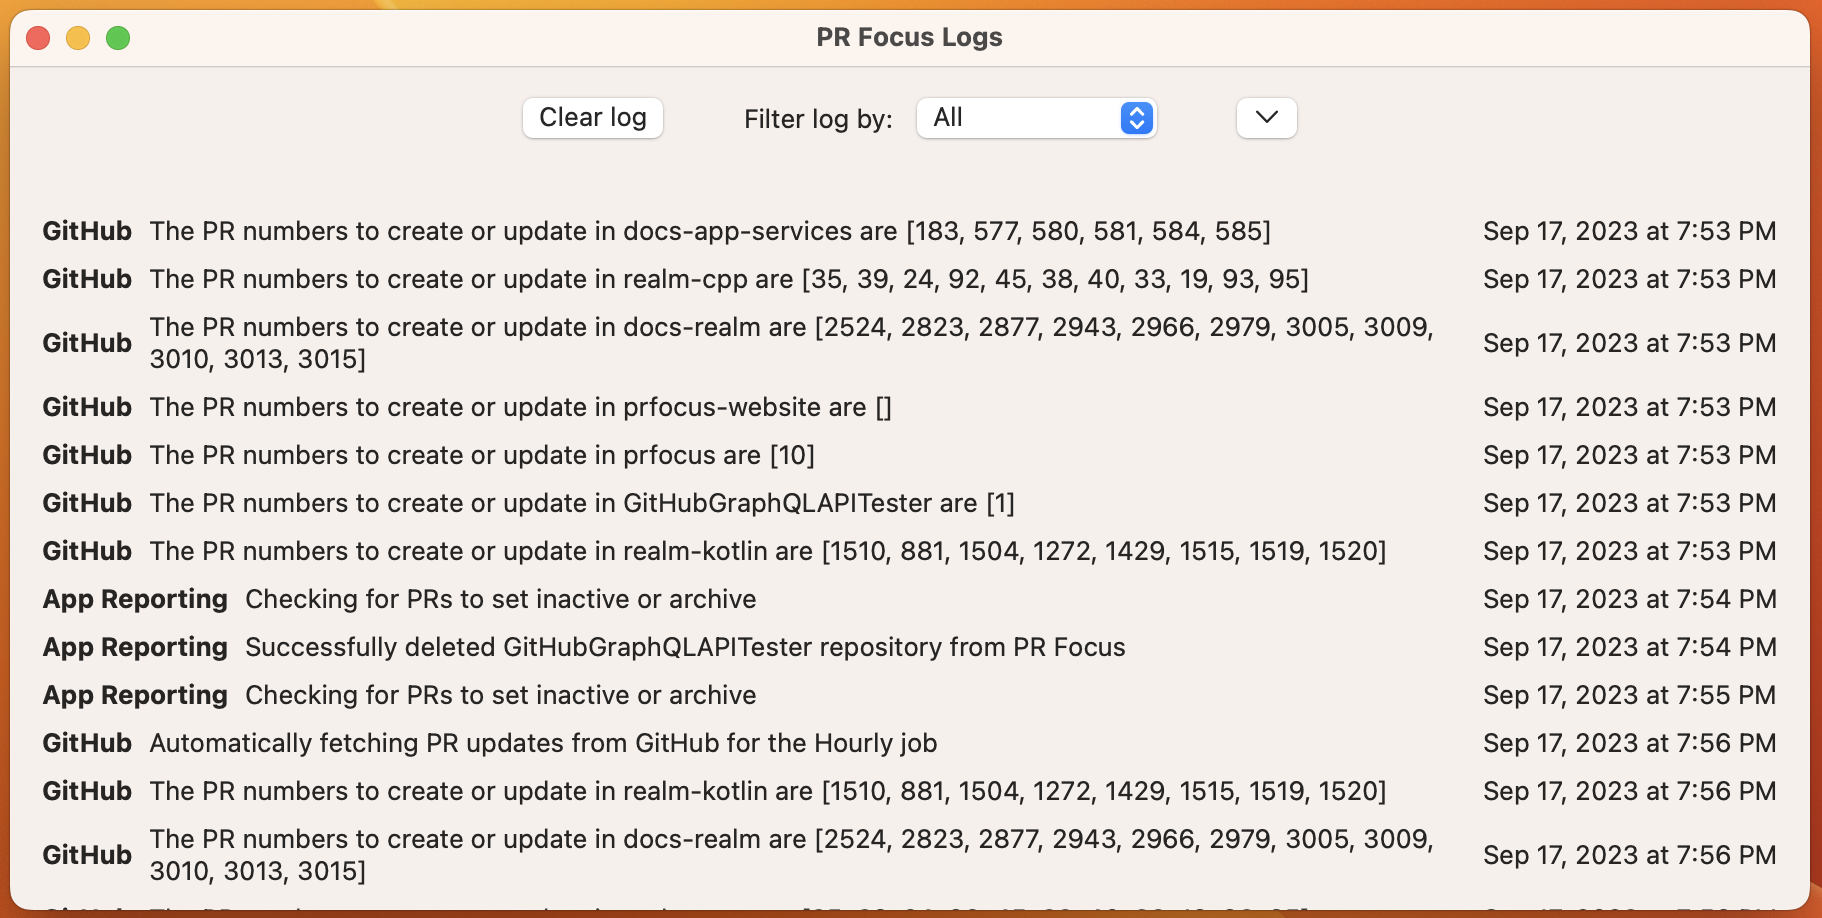 Screenshot showing the PR Focus logs view with a list of log activities and timestamps